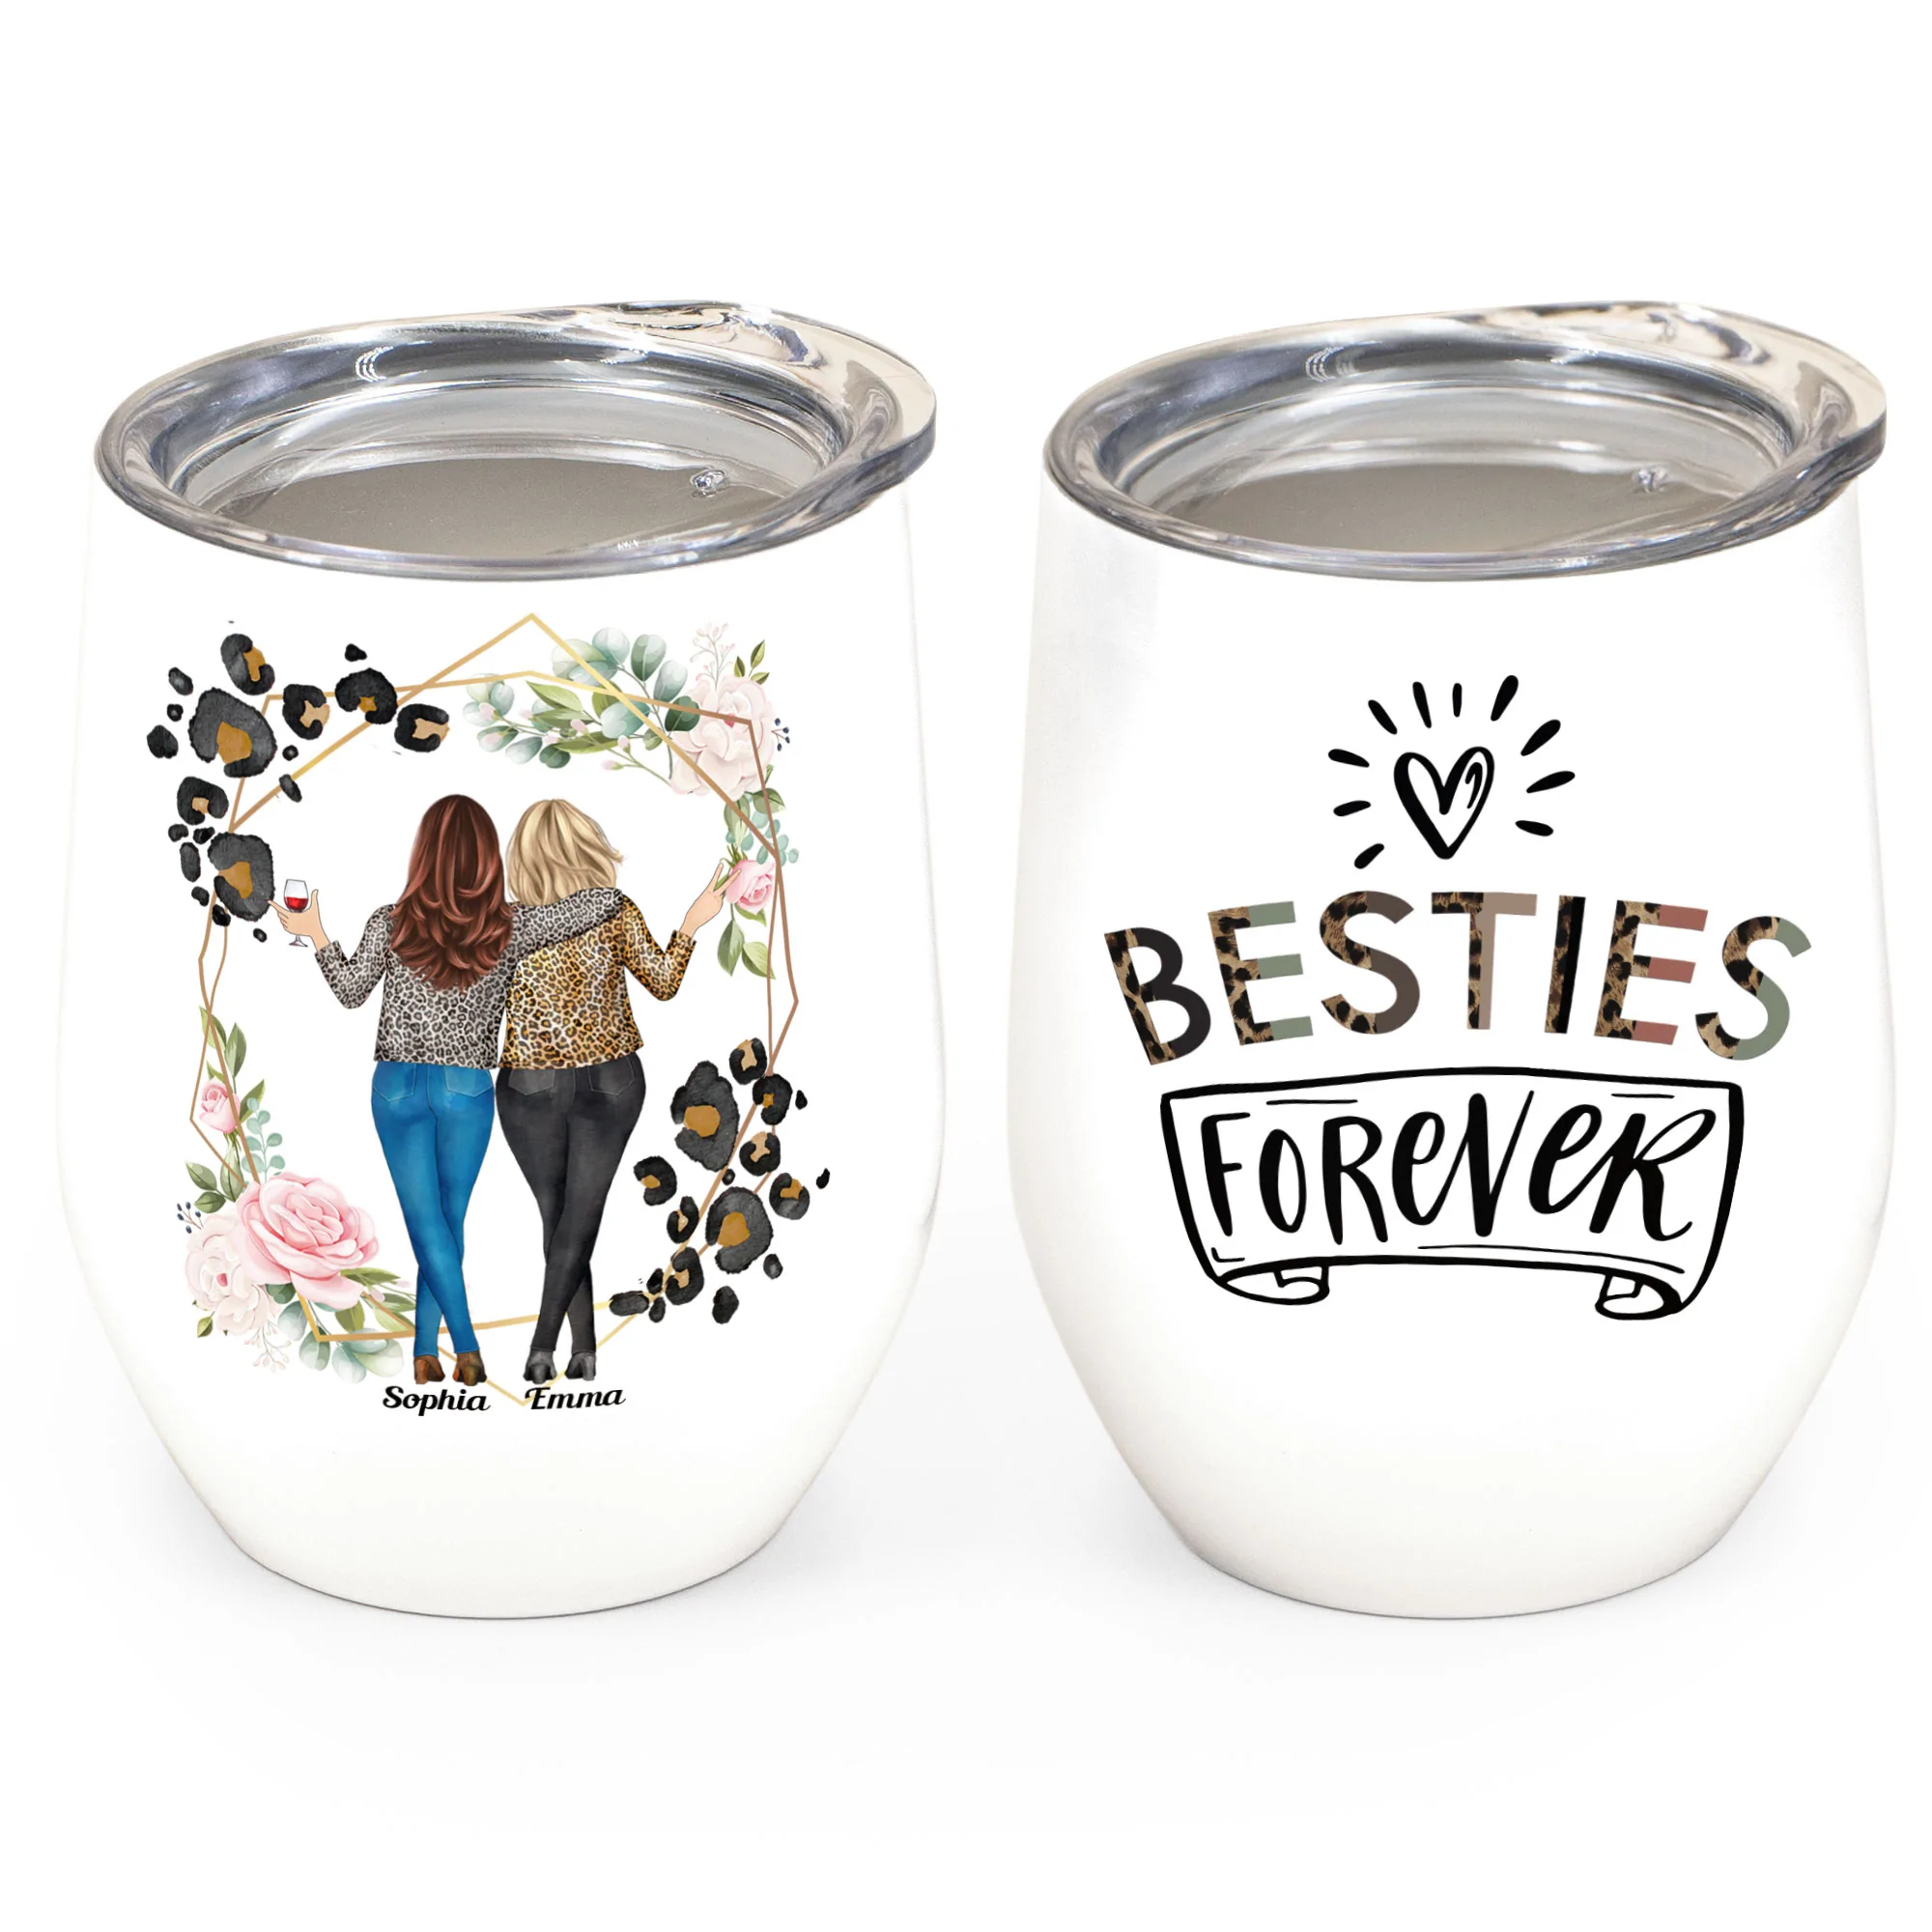 Besties Forever - Personalized Wine Tumbler - Birthday Gift Funny Gift For Besties, BFF, Soul Sisters, Soul Sistas